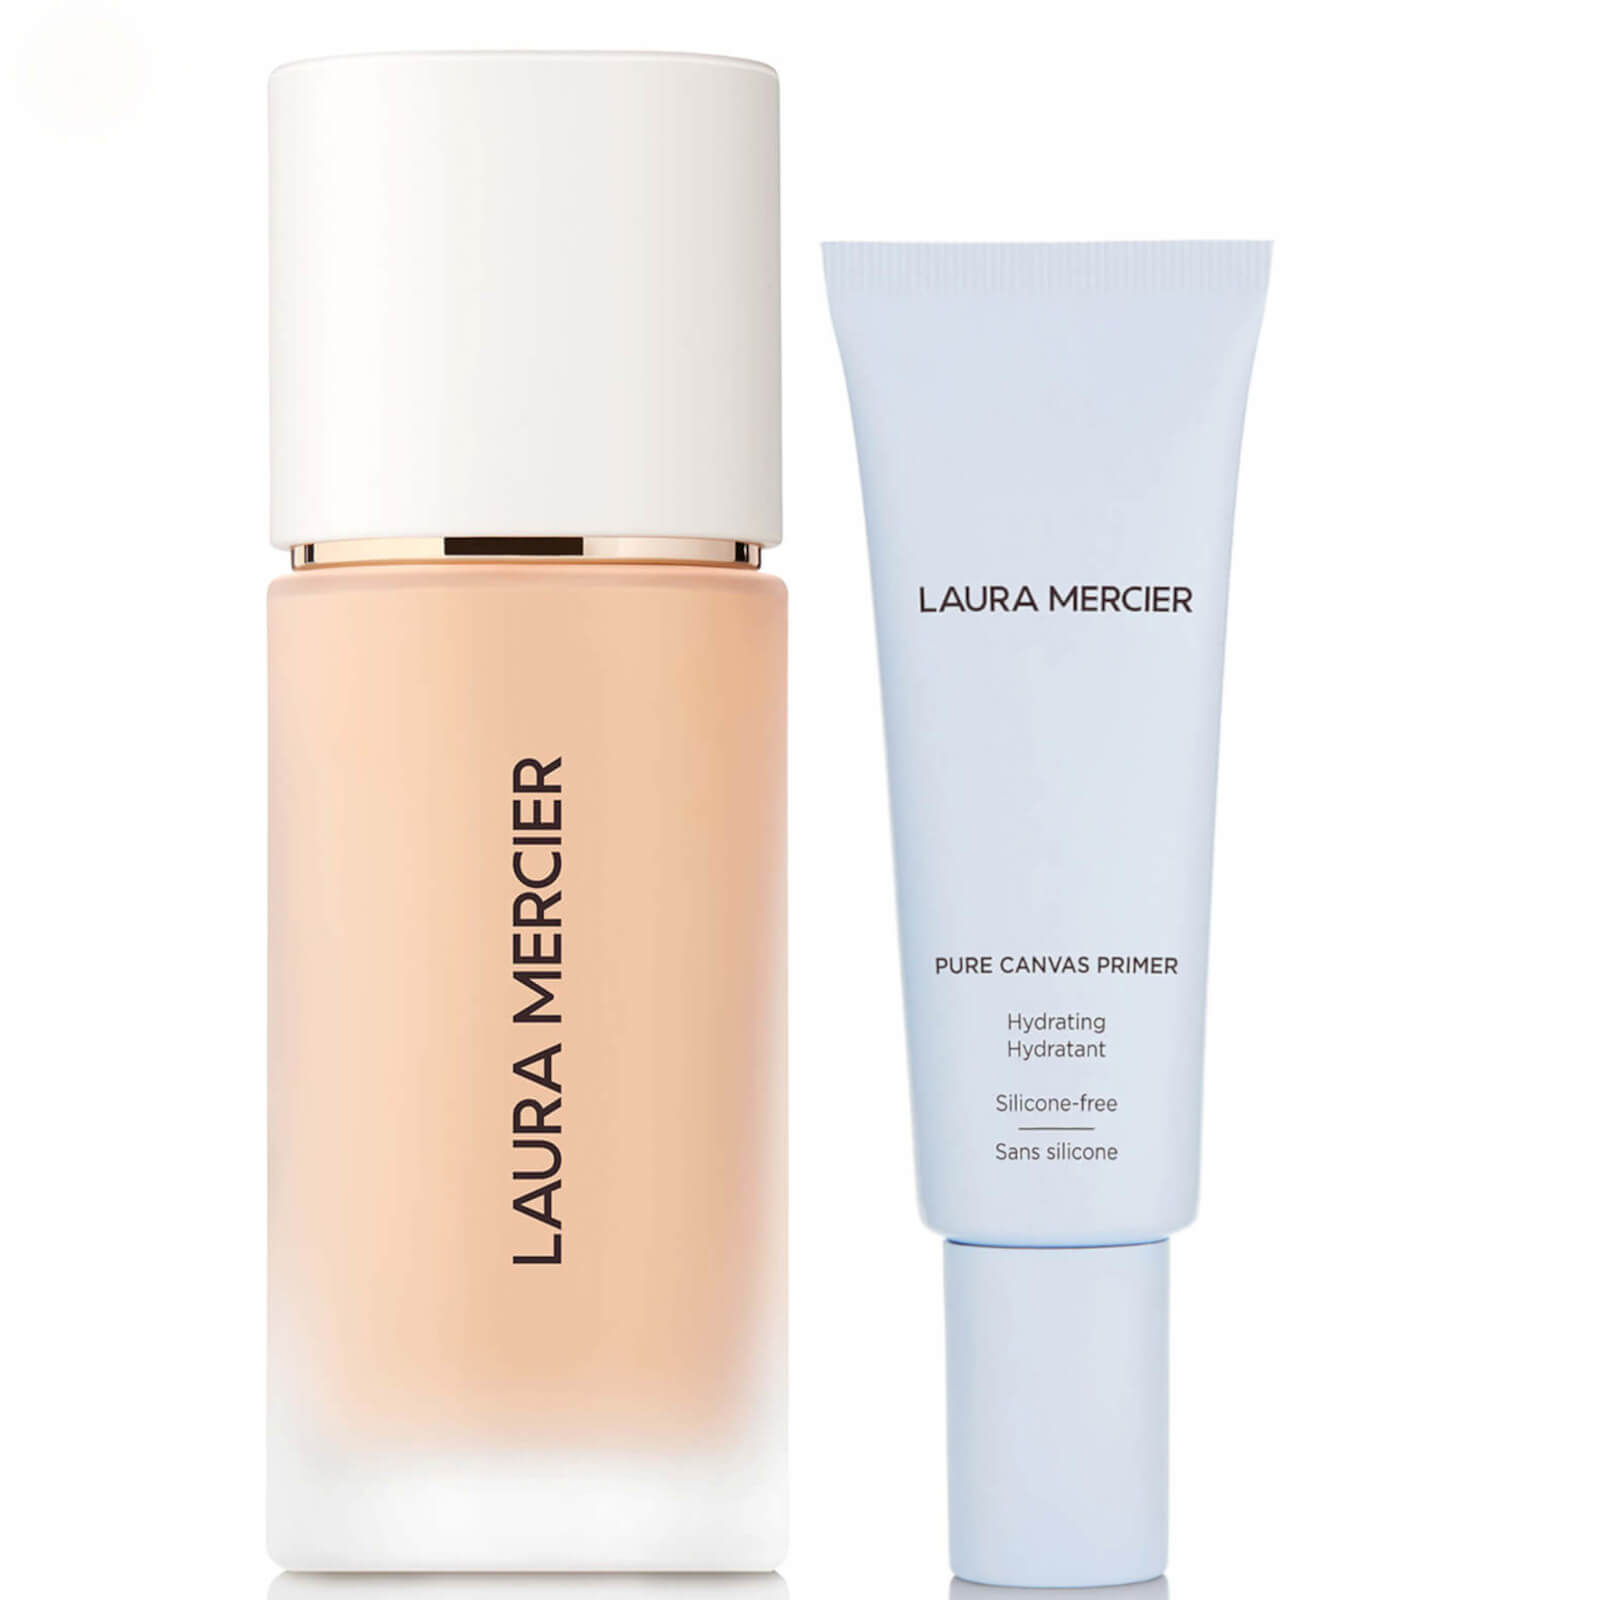 Laura Mercier Real Flawless Foundation and Pure Canvas Hydrating Primer Bundle (Various Shades) - 1N